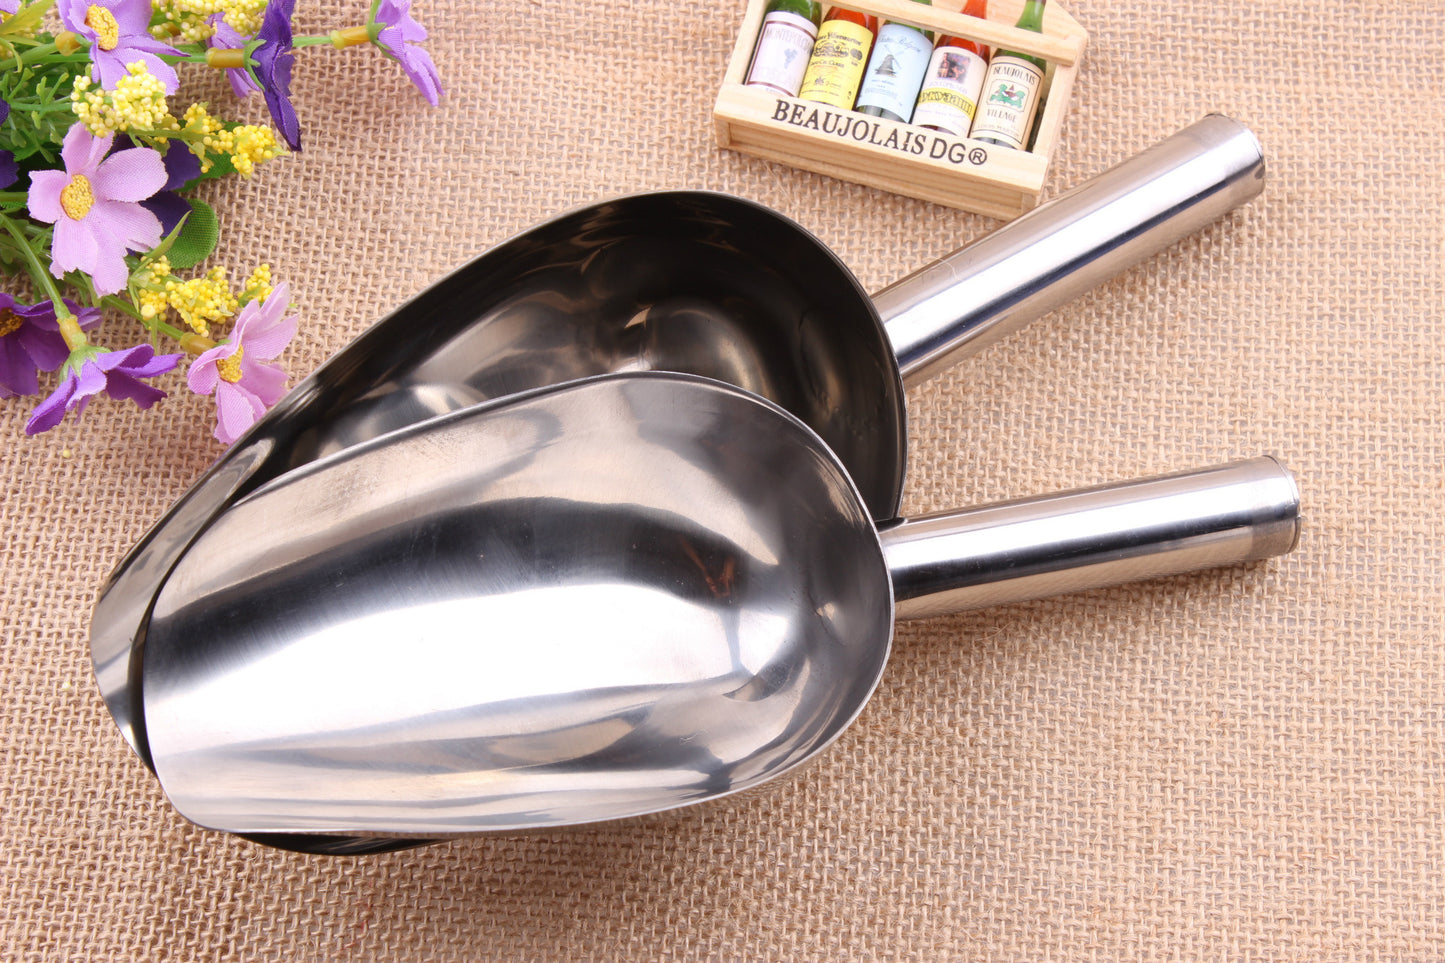 2 PCS Stainless Steel Small and Large Multipurpose Scooper